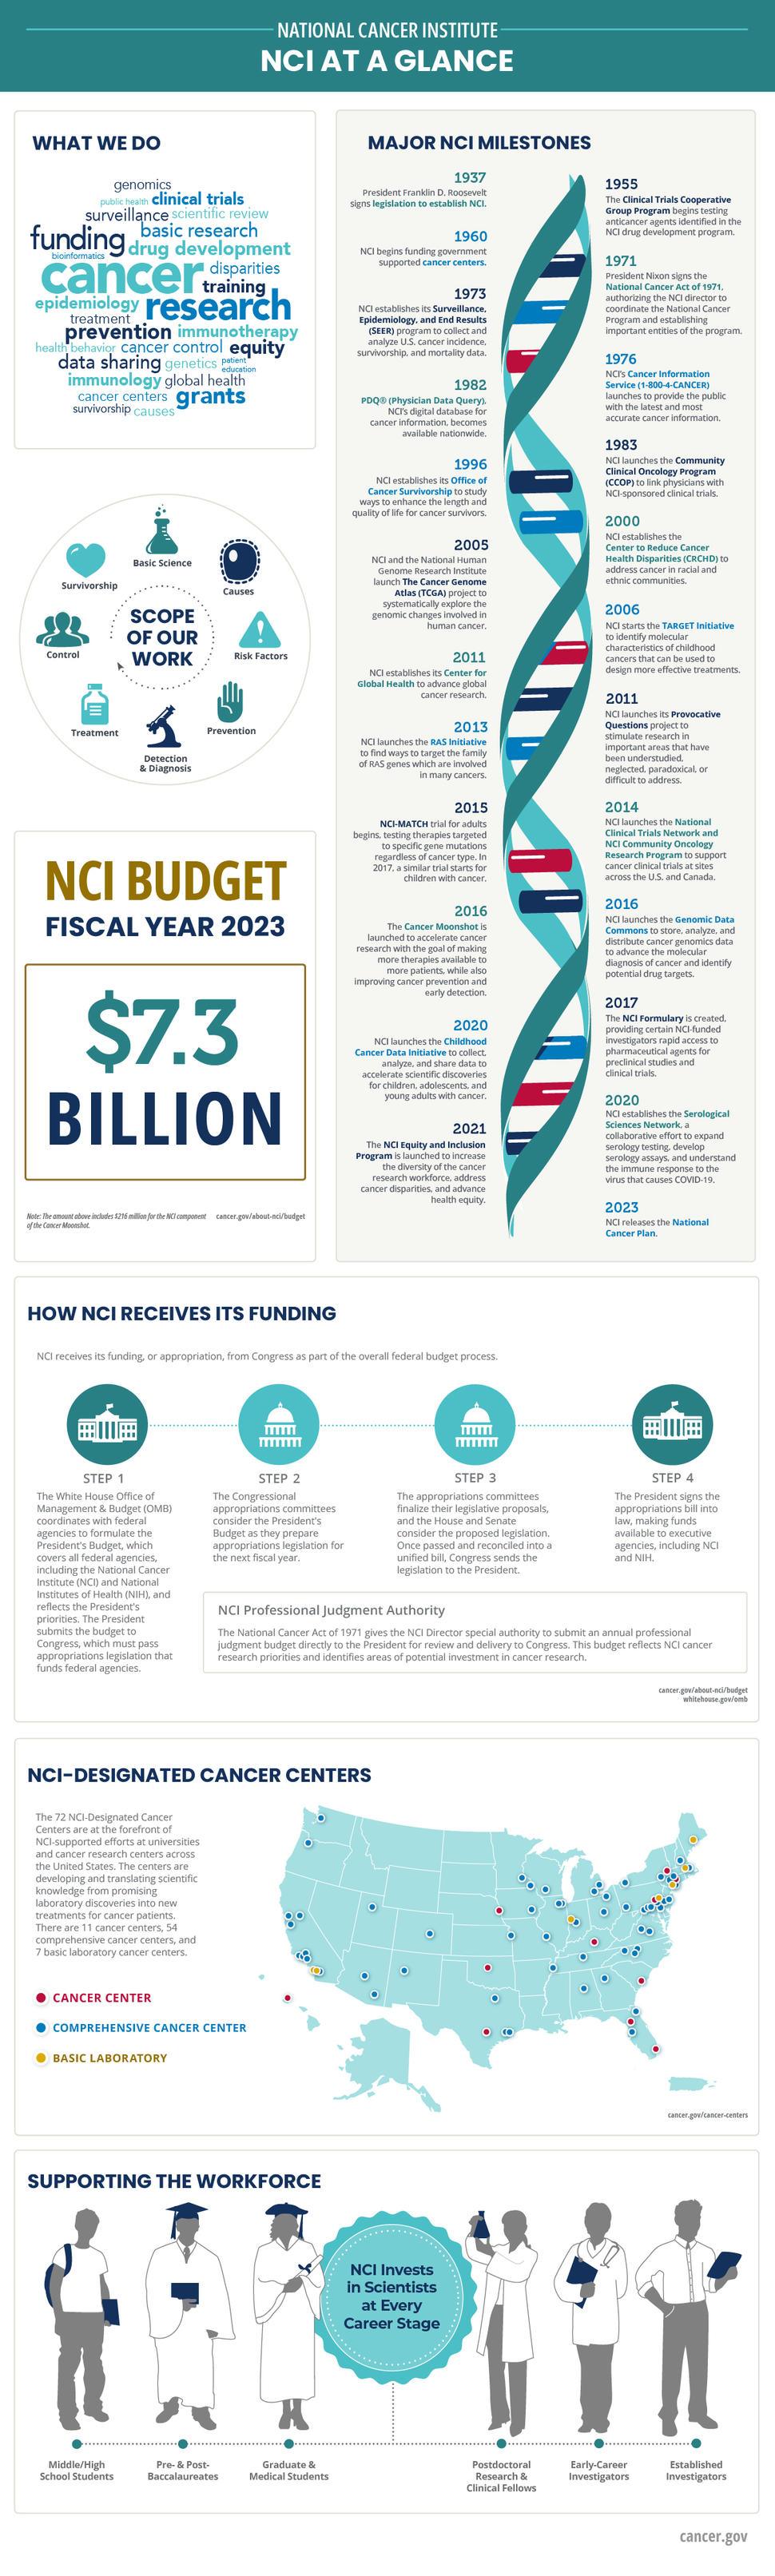 An overview of NCI's historical milestones, funding process, training efforts, and the NCI-designated cancer centers. NCI's work includes genomics, public health, clinical trials, surveillance, scientific review, basic research, funding, drug development, disparities research, survivorship research, and more. Funds available to the NCI in FY 2023 totaled $7.3 billion. NCI invests in scientists at every education and career stage from middle and high school students through established investigators.